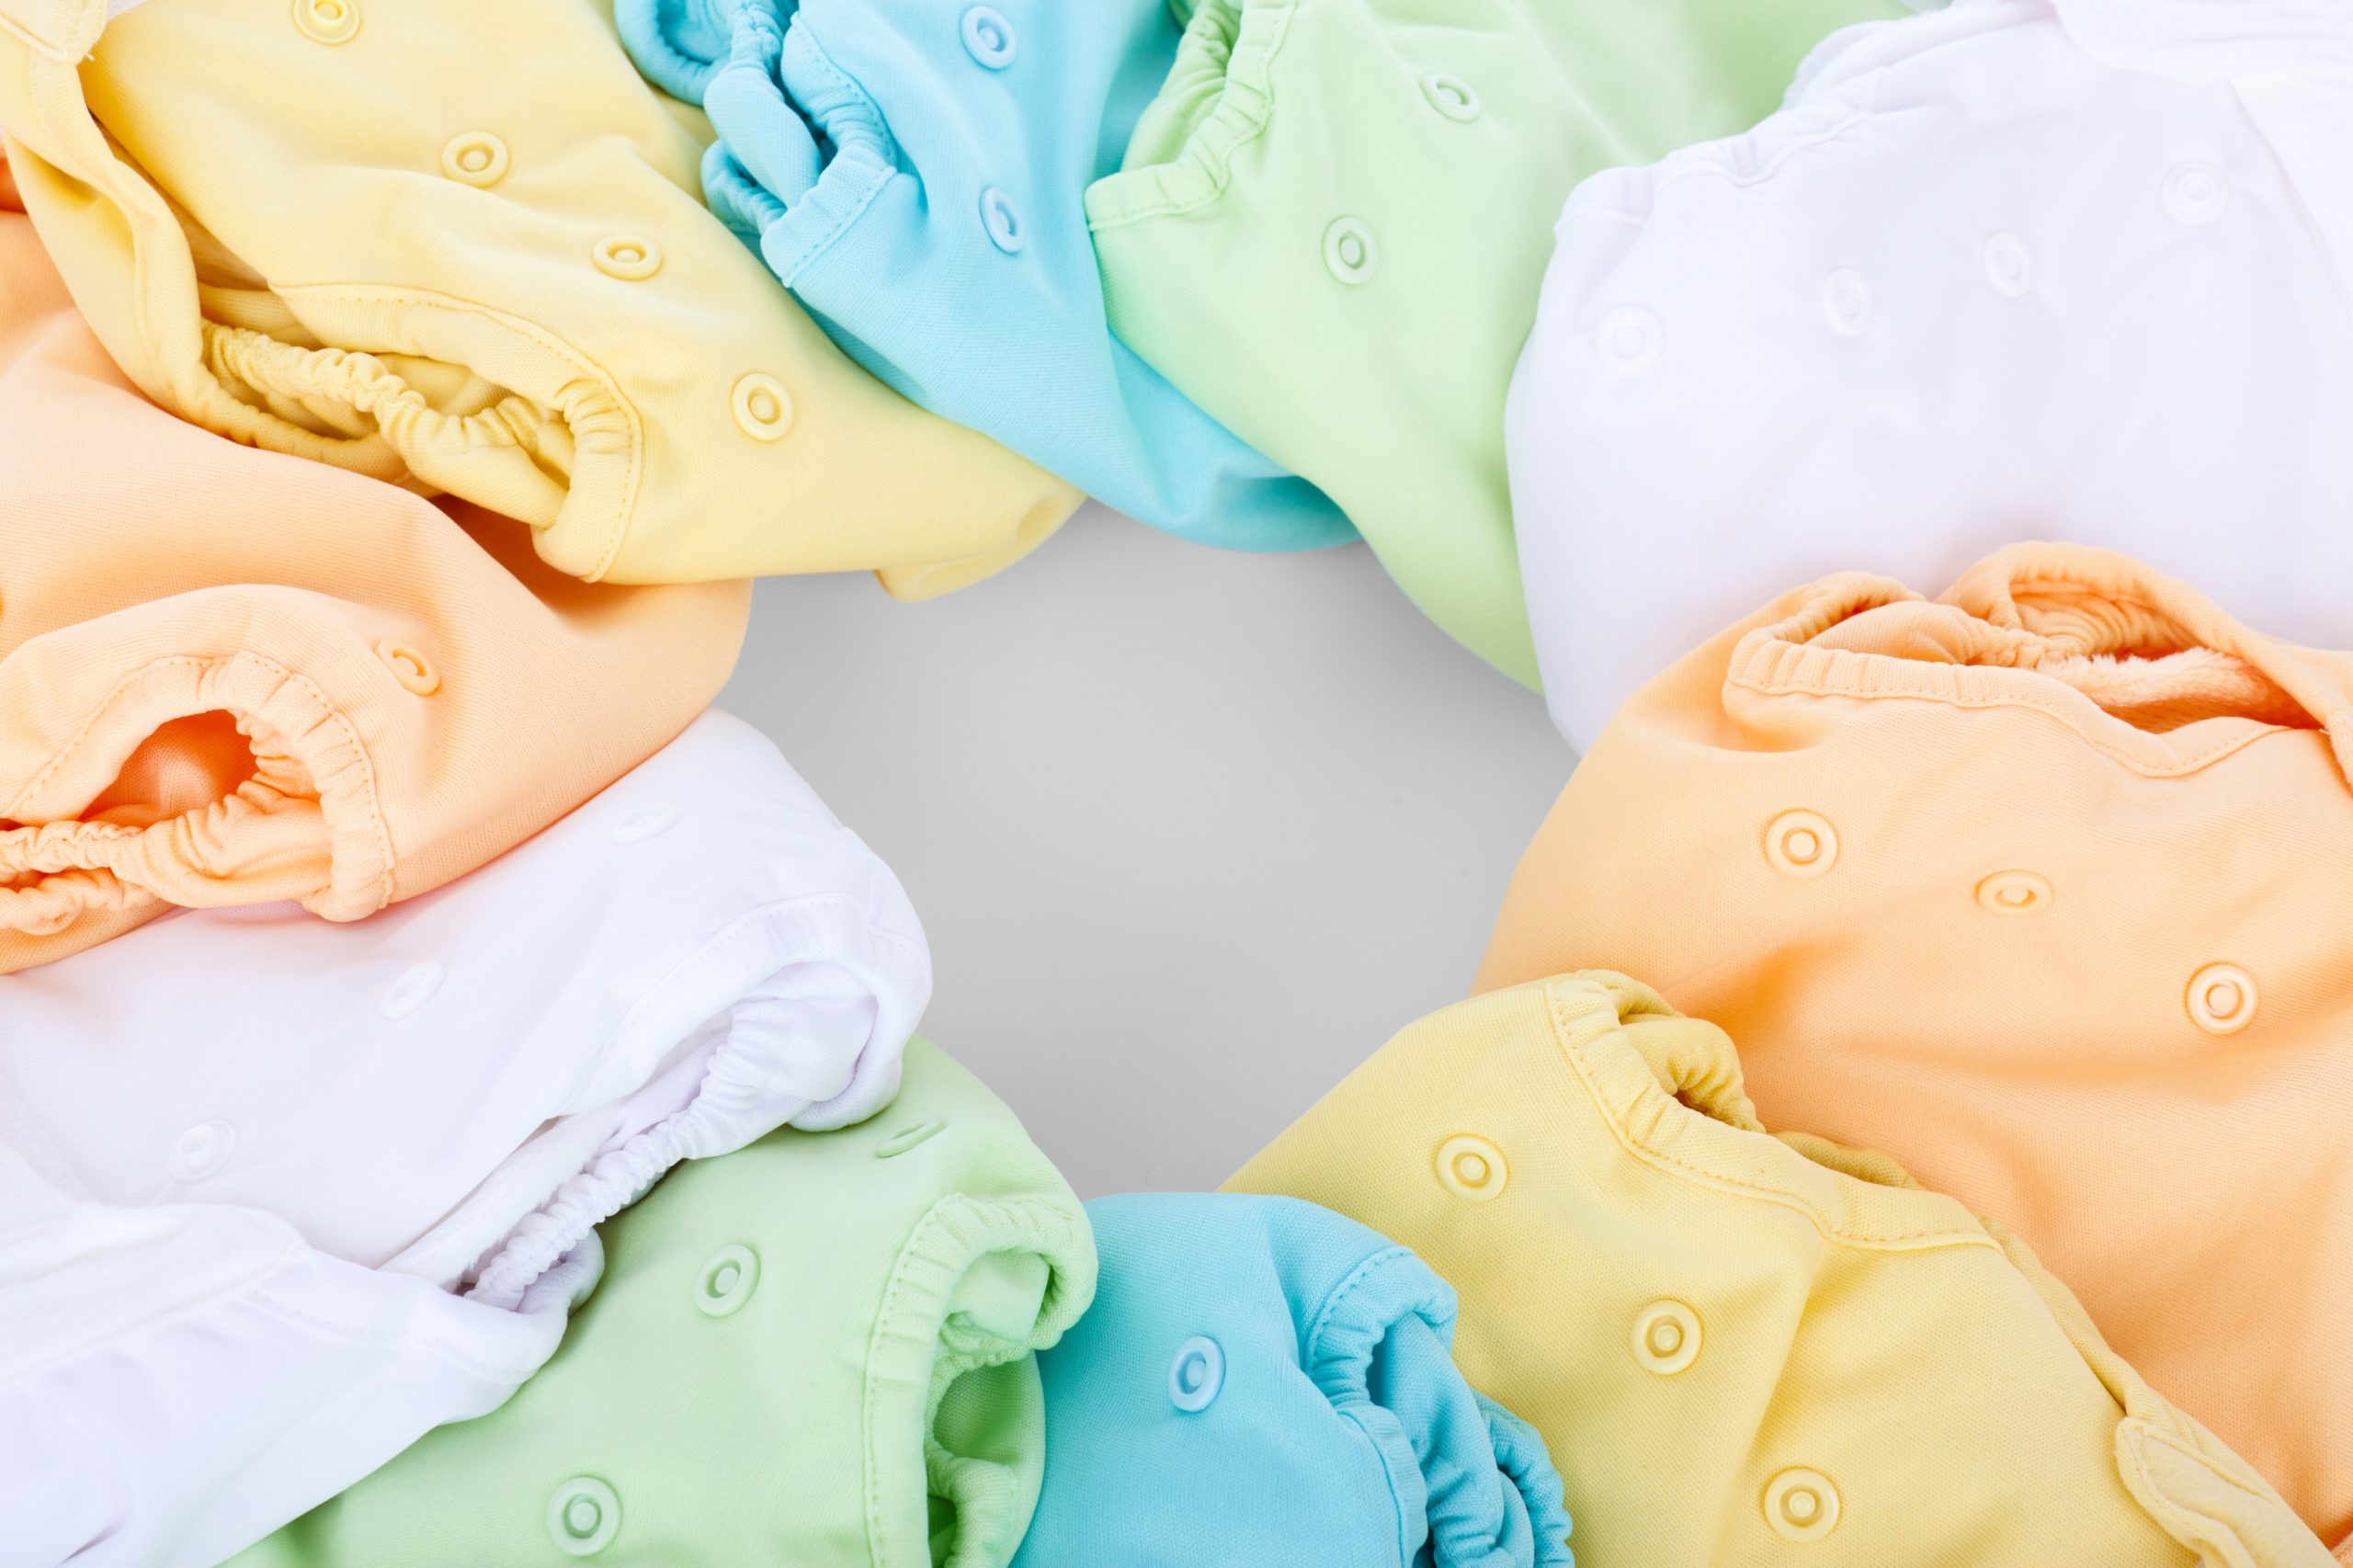 How Do You Store Your Cloth Diapers?